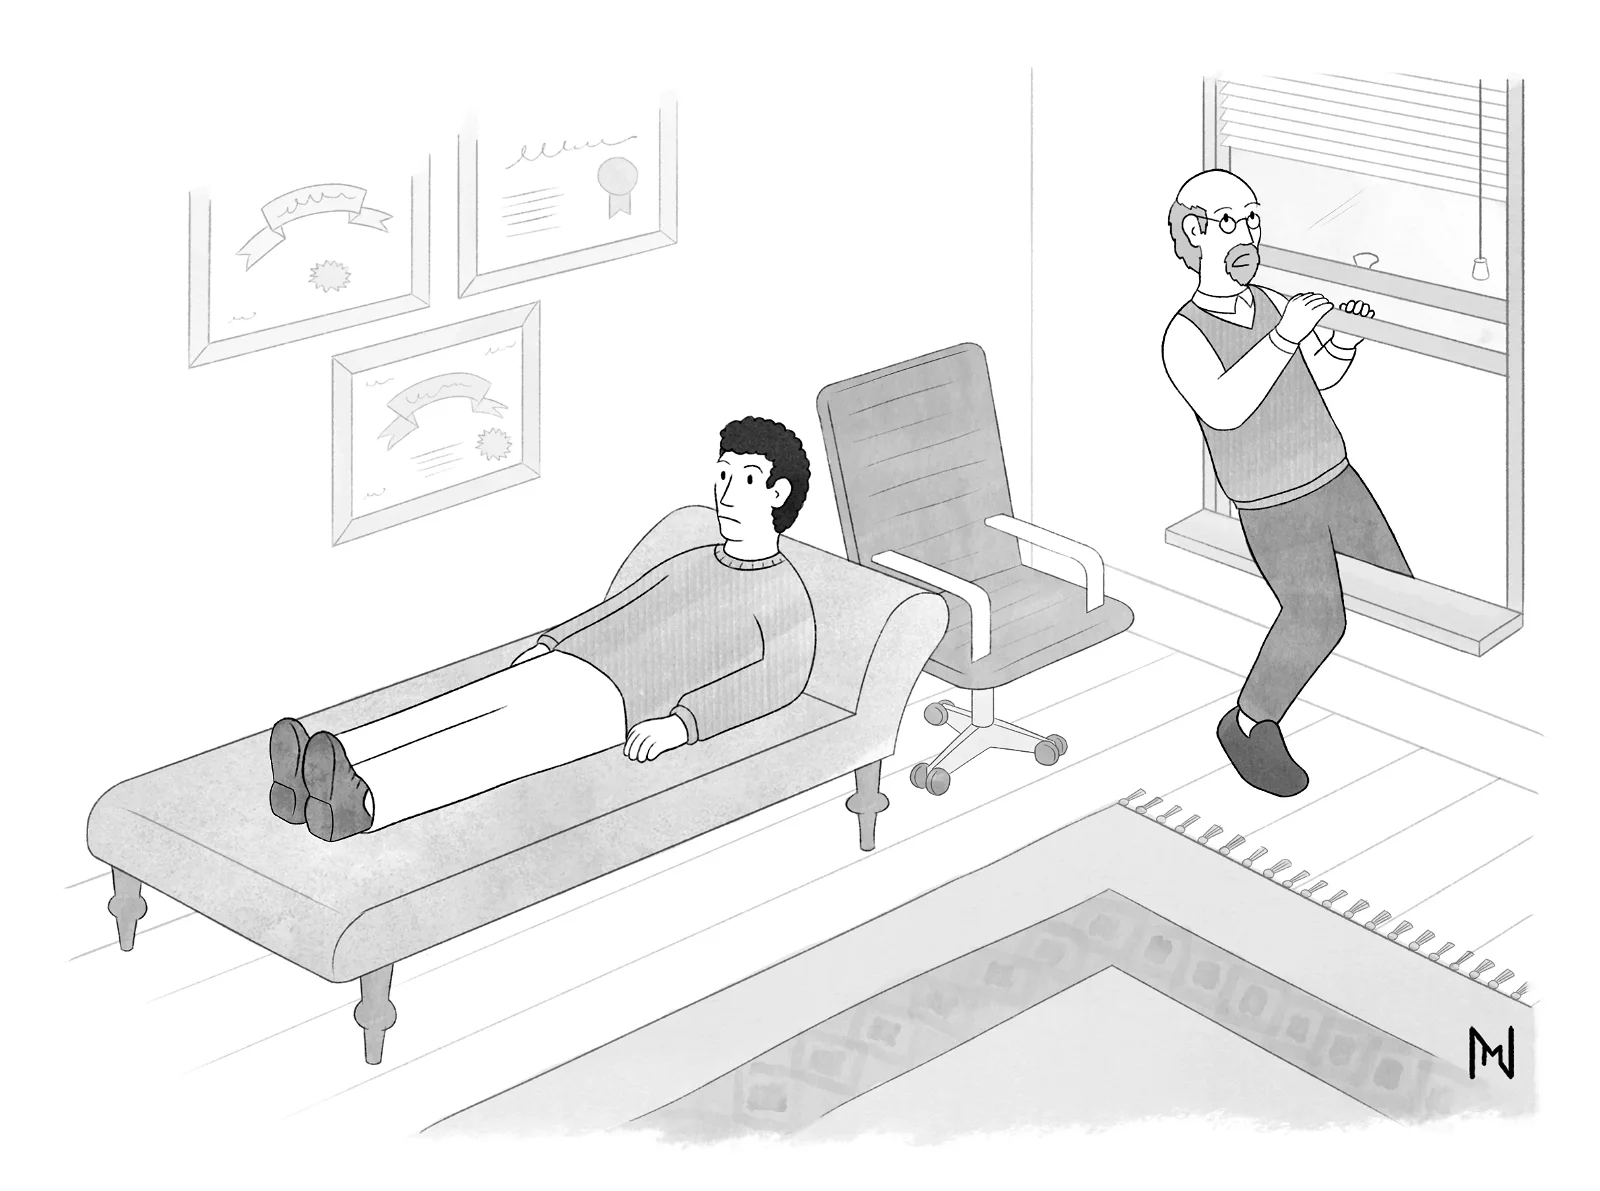 A man lies on a couch in a therapist's office while the therapist tries to sneak out of the room